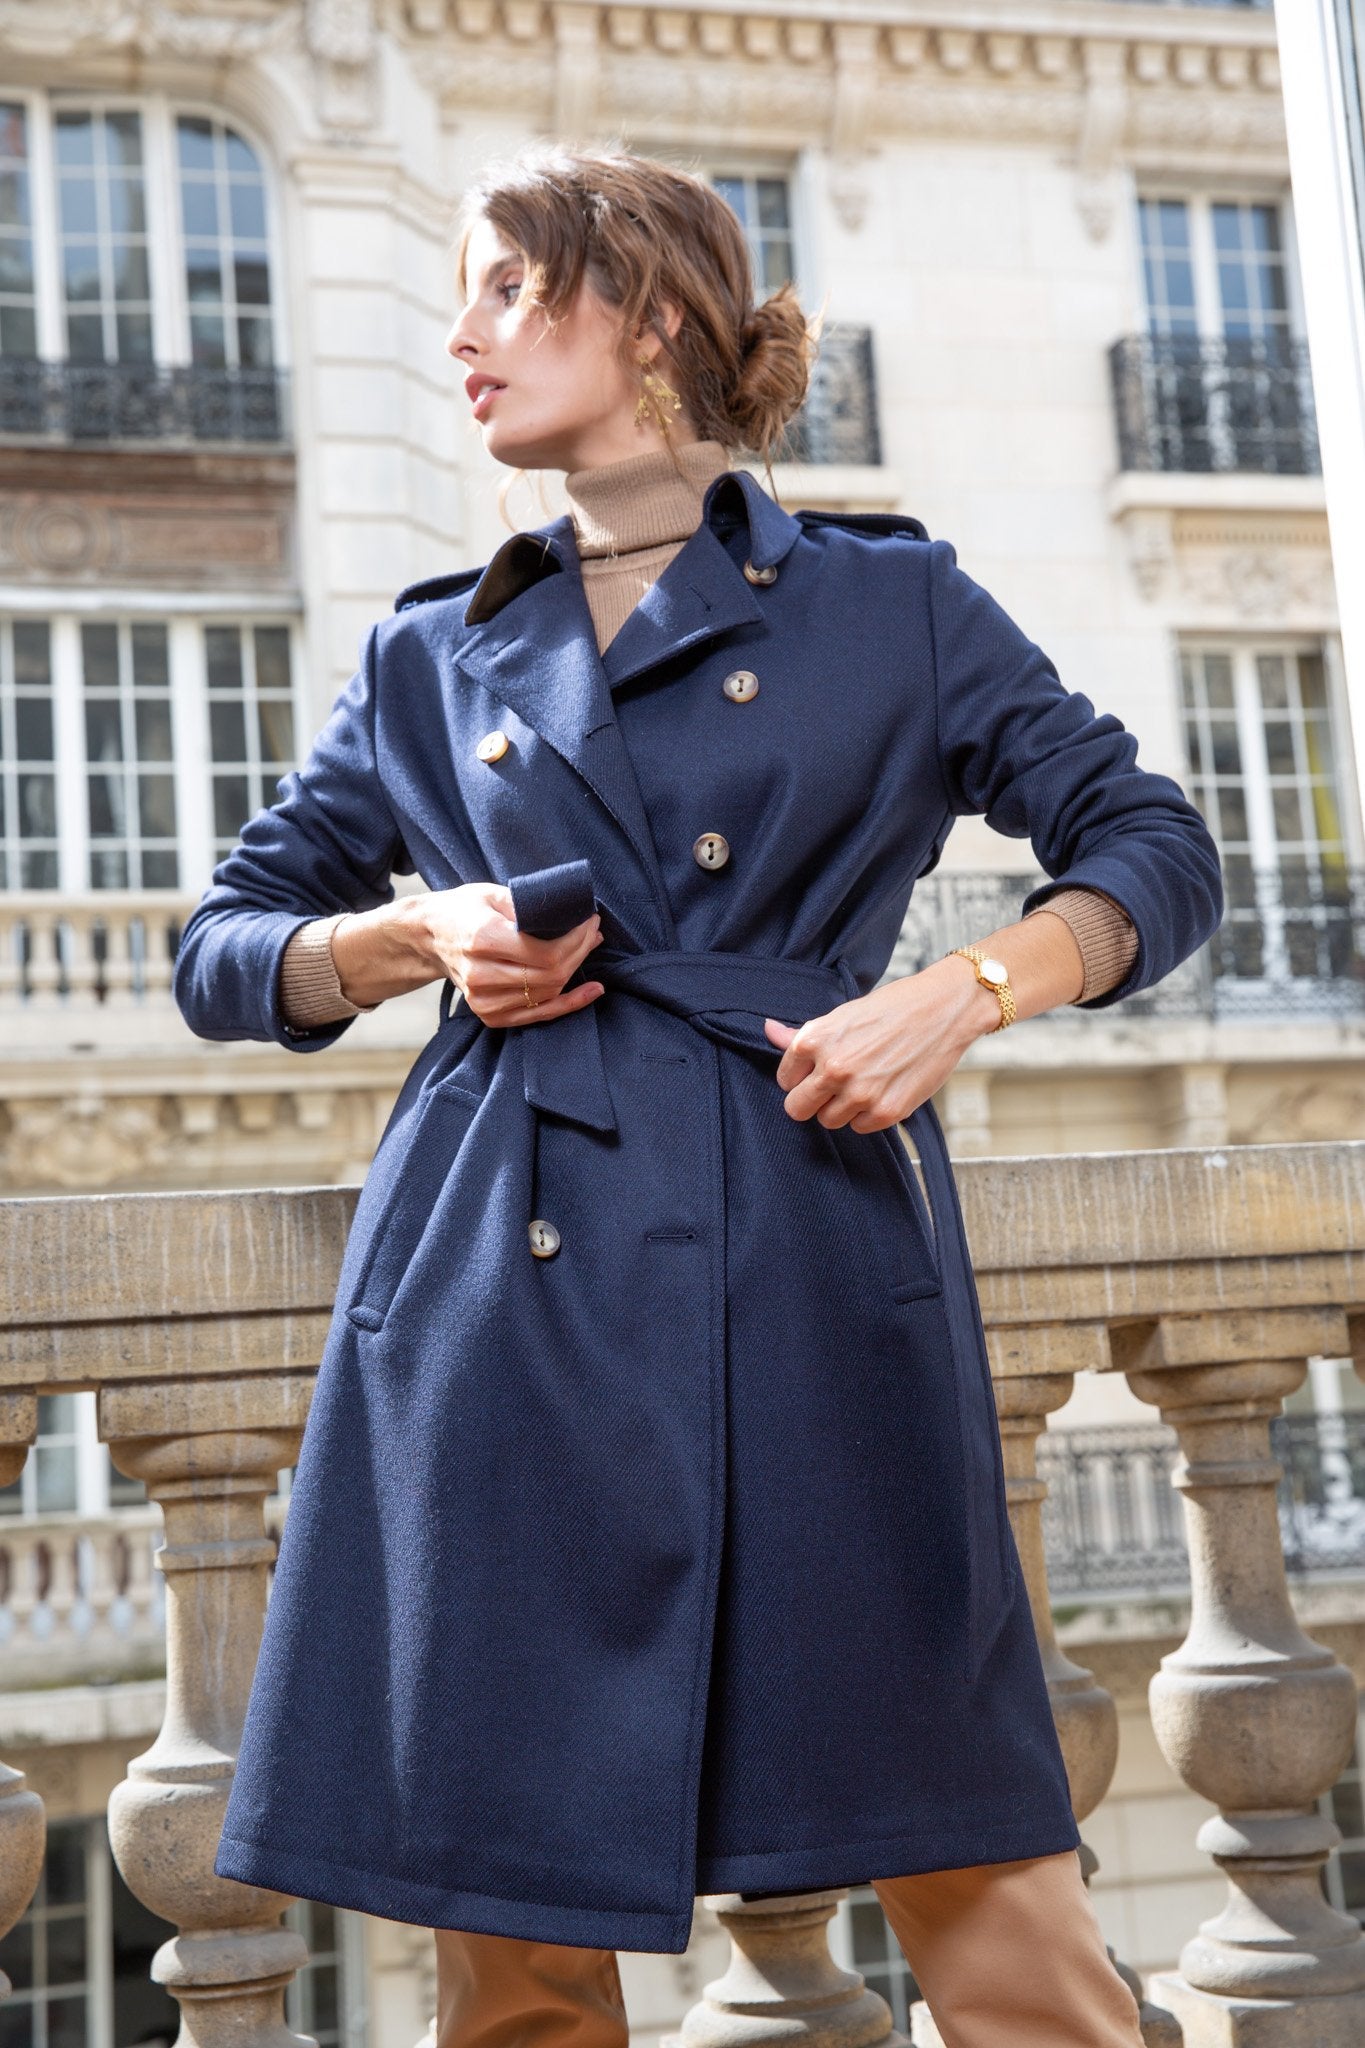 Counterpart overhead Kangaroo Women's trench coat in navy wool and cashmere - Curling Paris